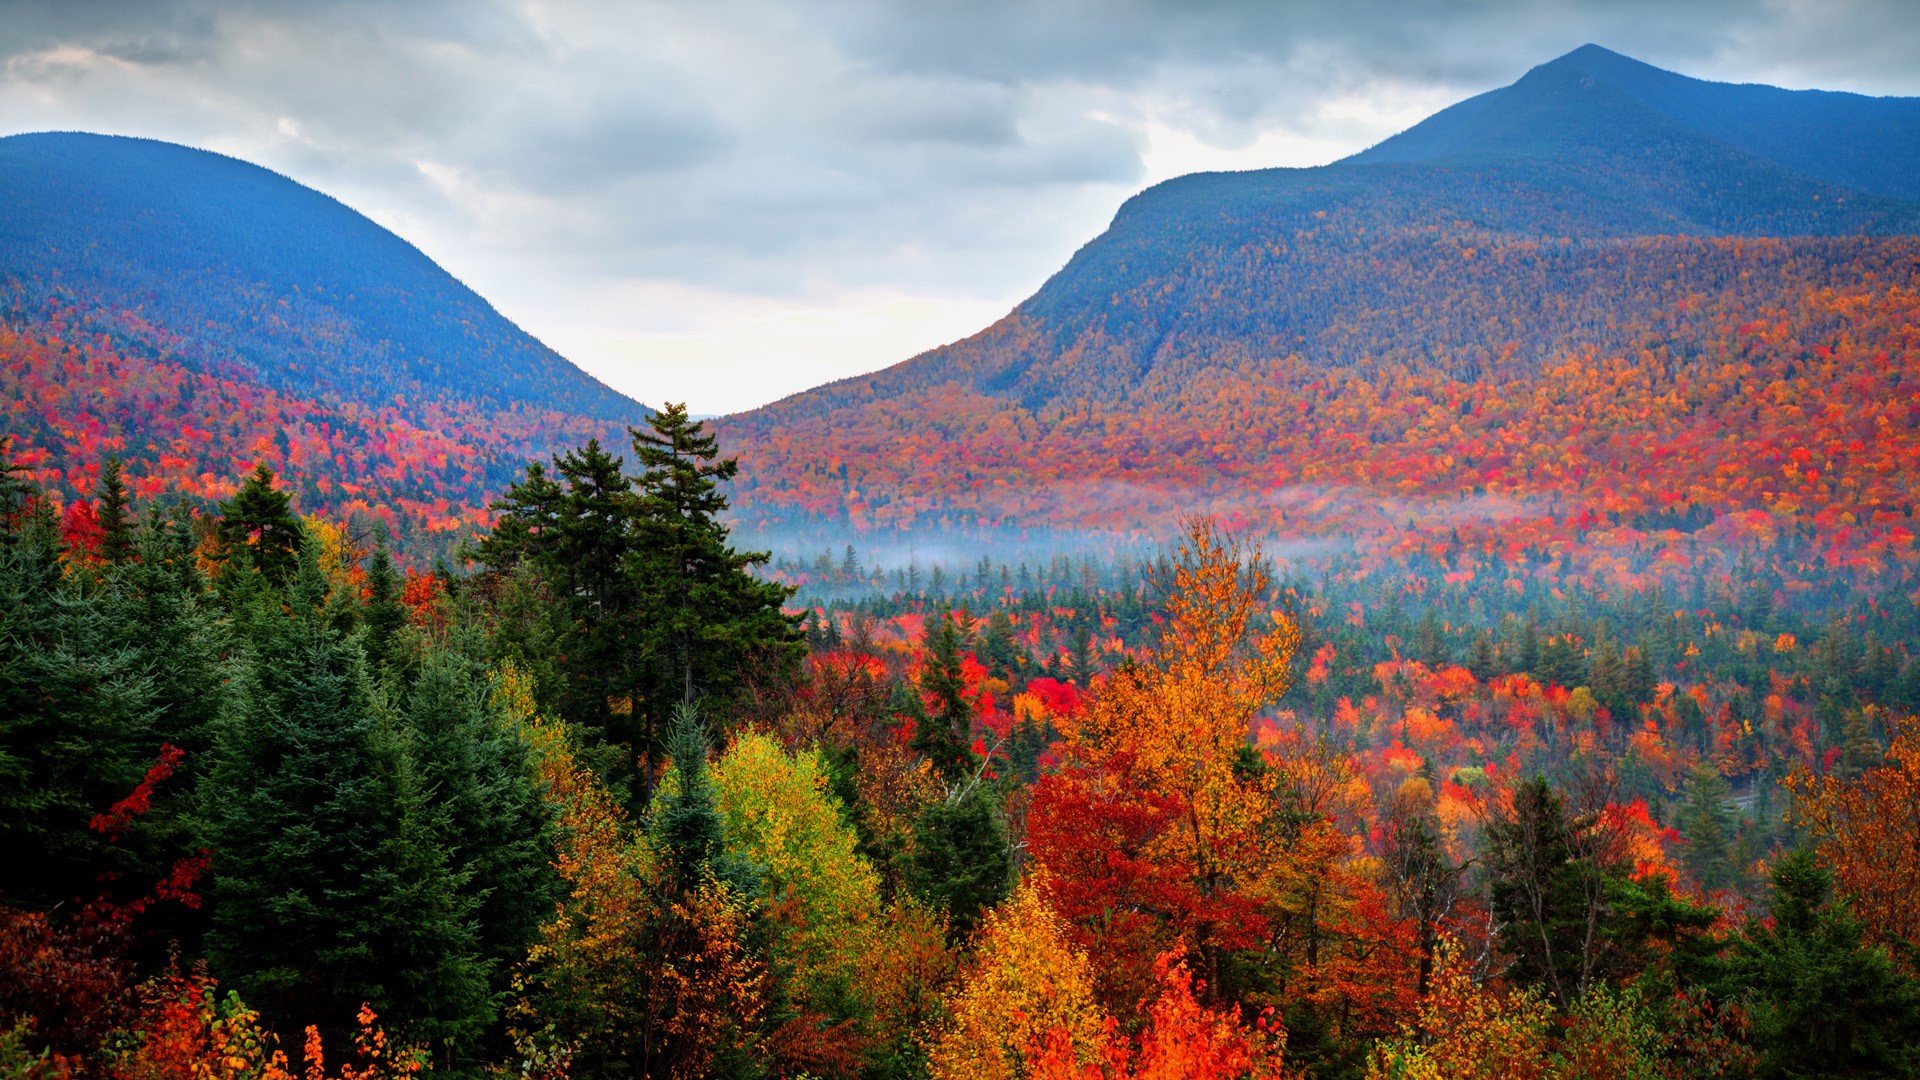 General 1920x1080 nature landscape fall mountains clouds sky trees forest White Mountains New Hampshire USA